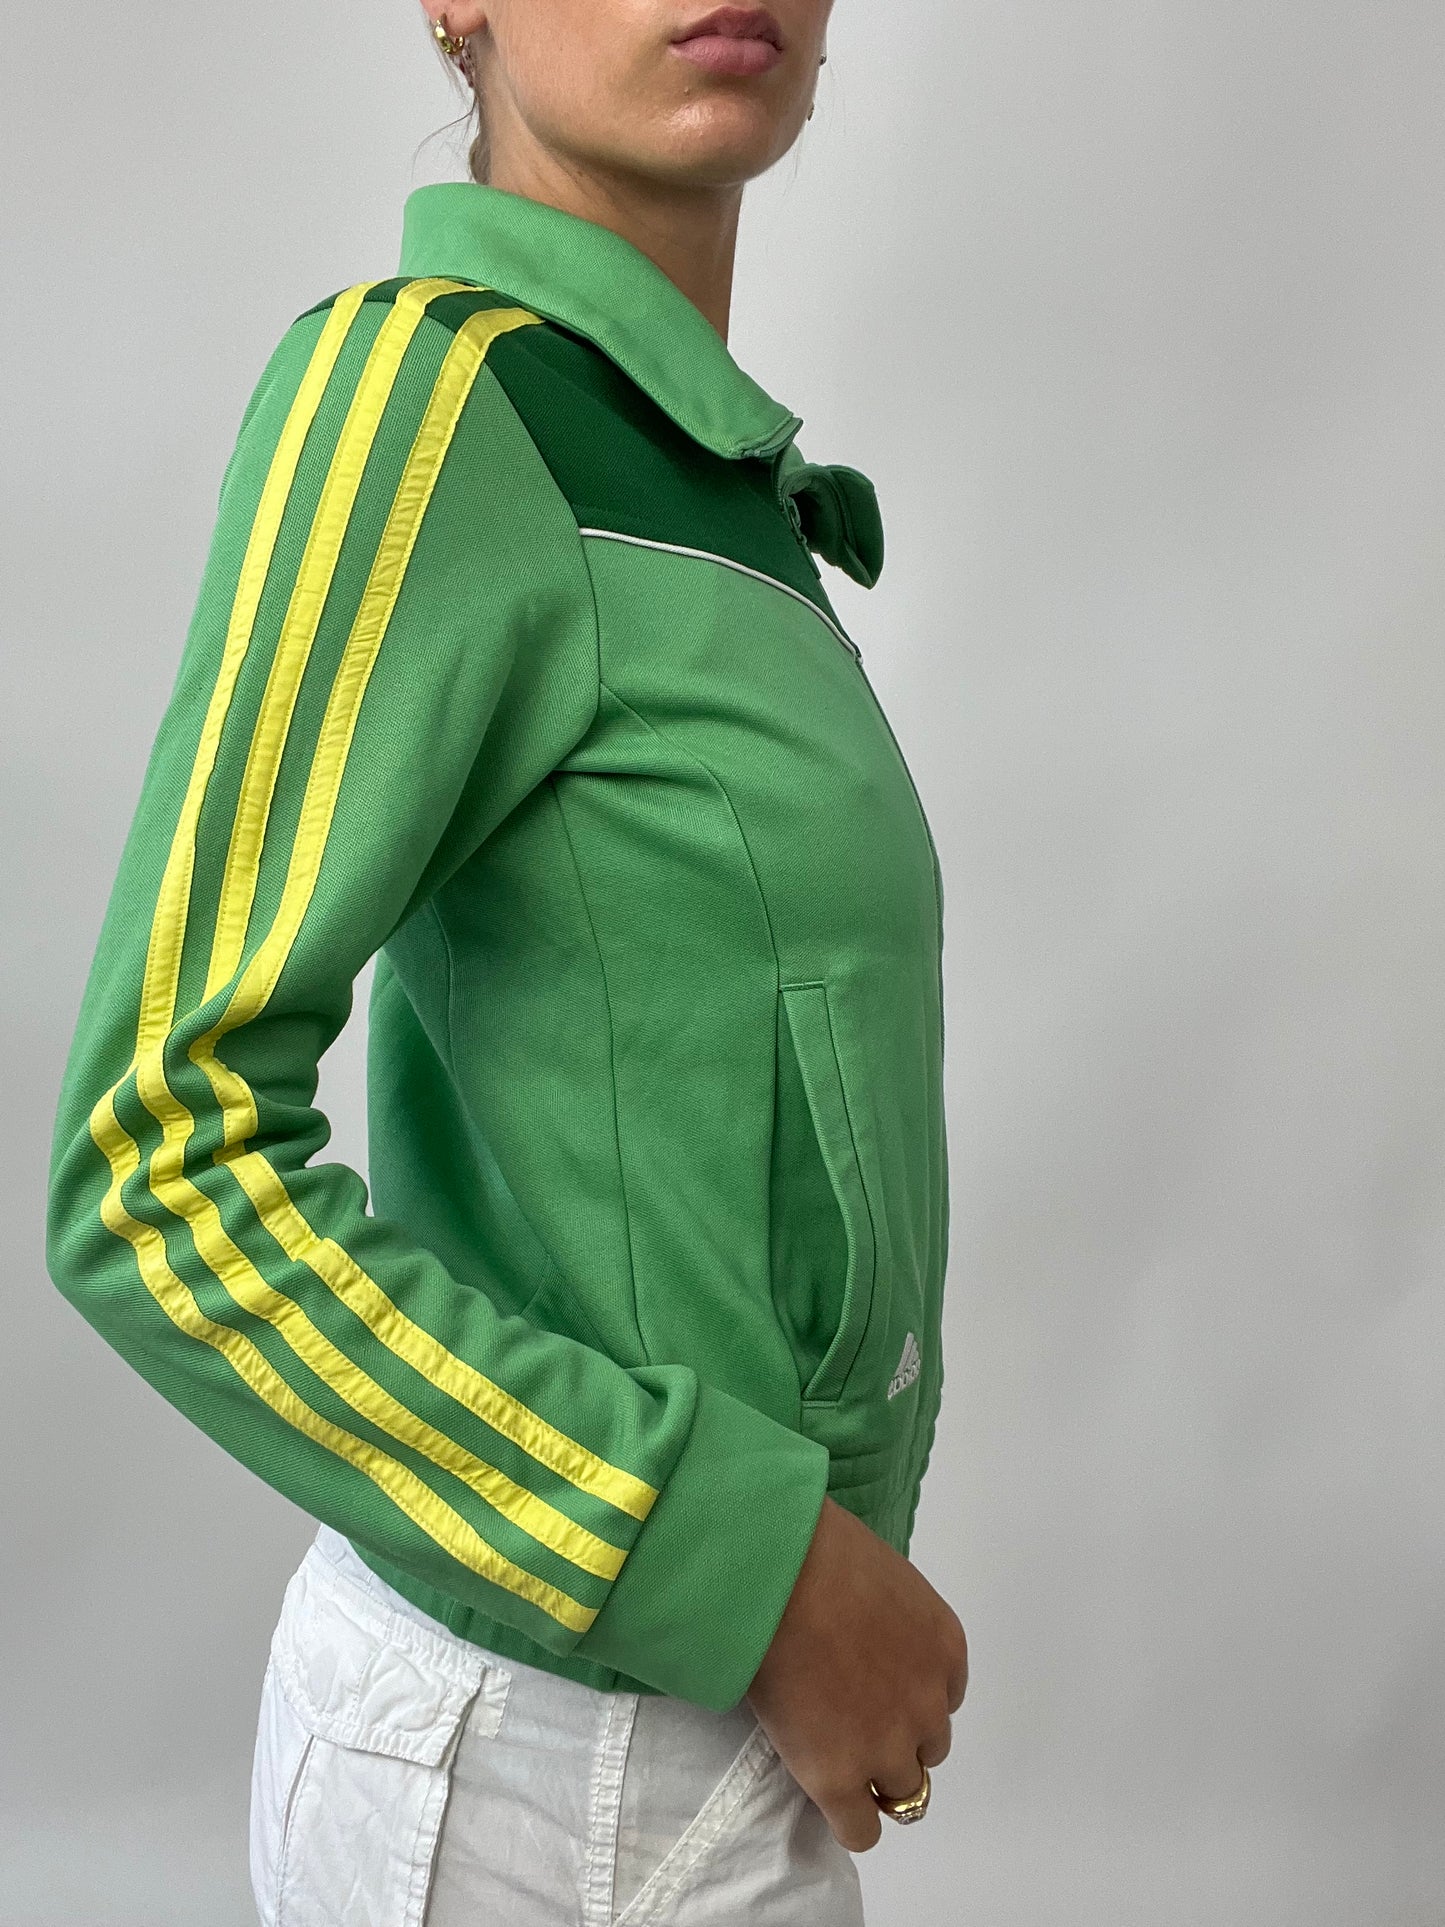 PUB GARDEN DROP | small green and yellow vintage adidas zip up